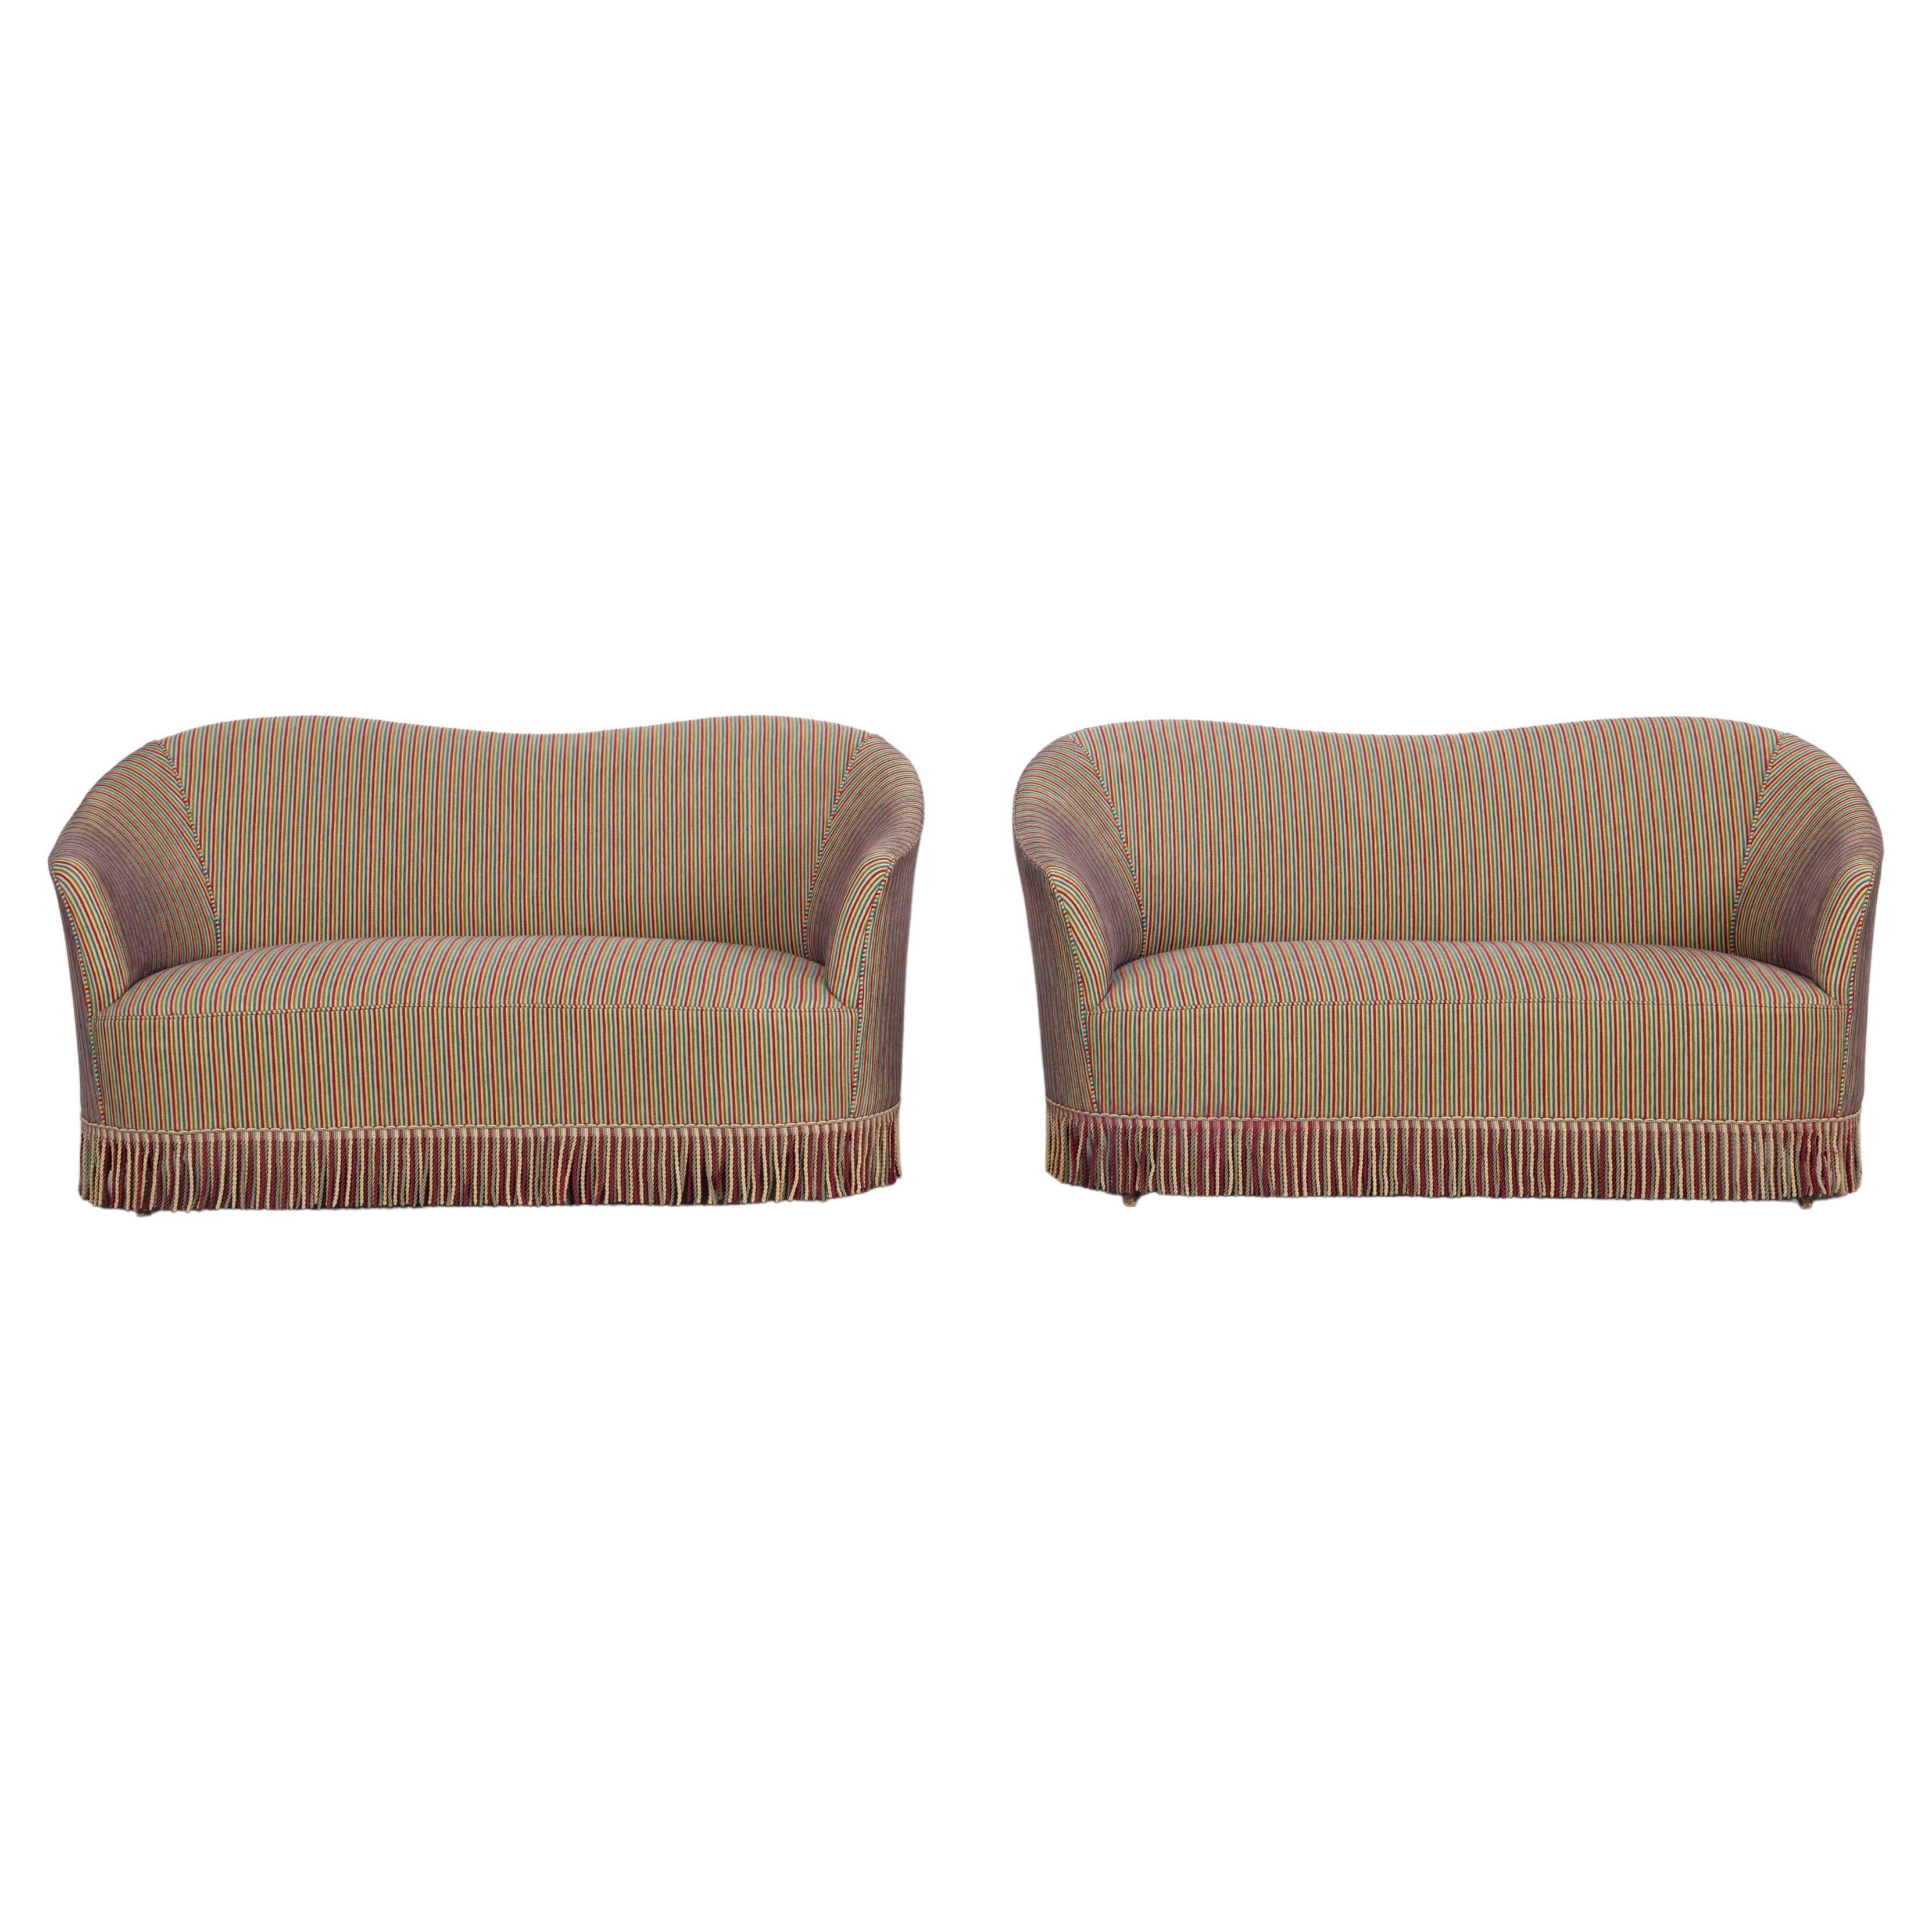 Set of 2 Sofas with Fabric by Fede Cheti, Italy 1940s For Sale